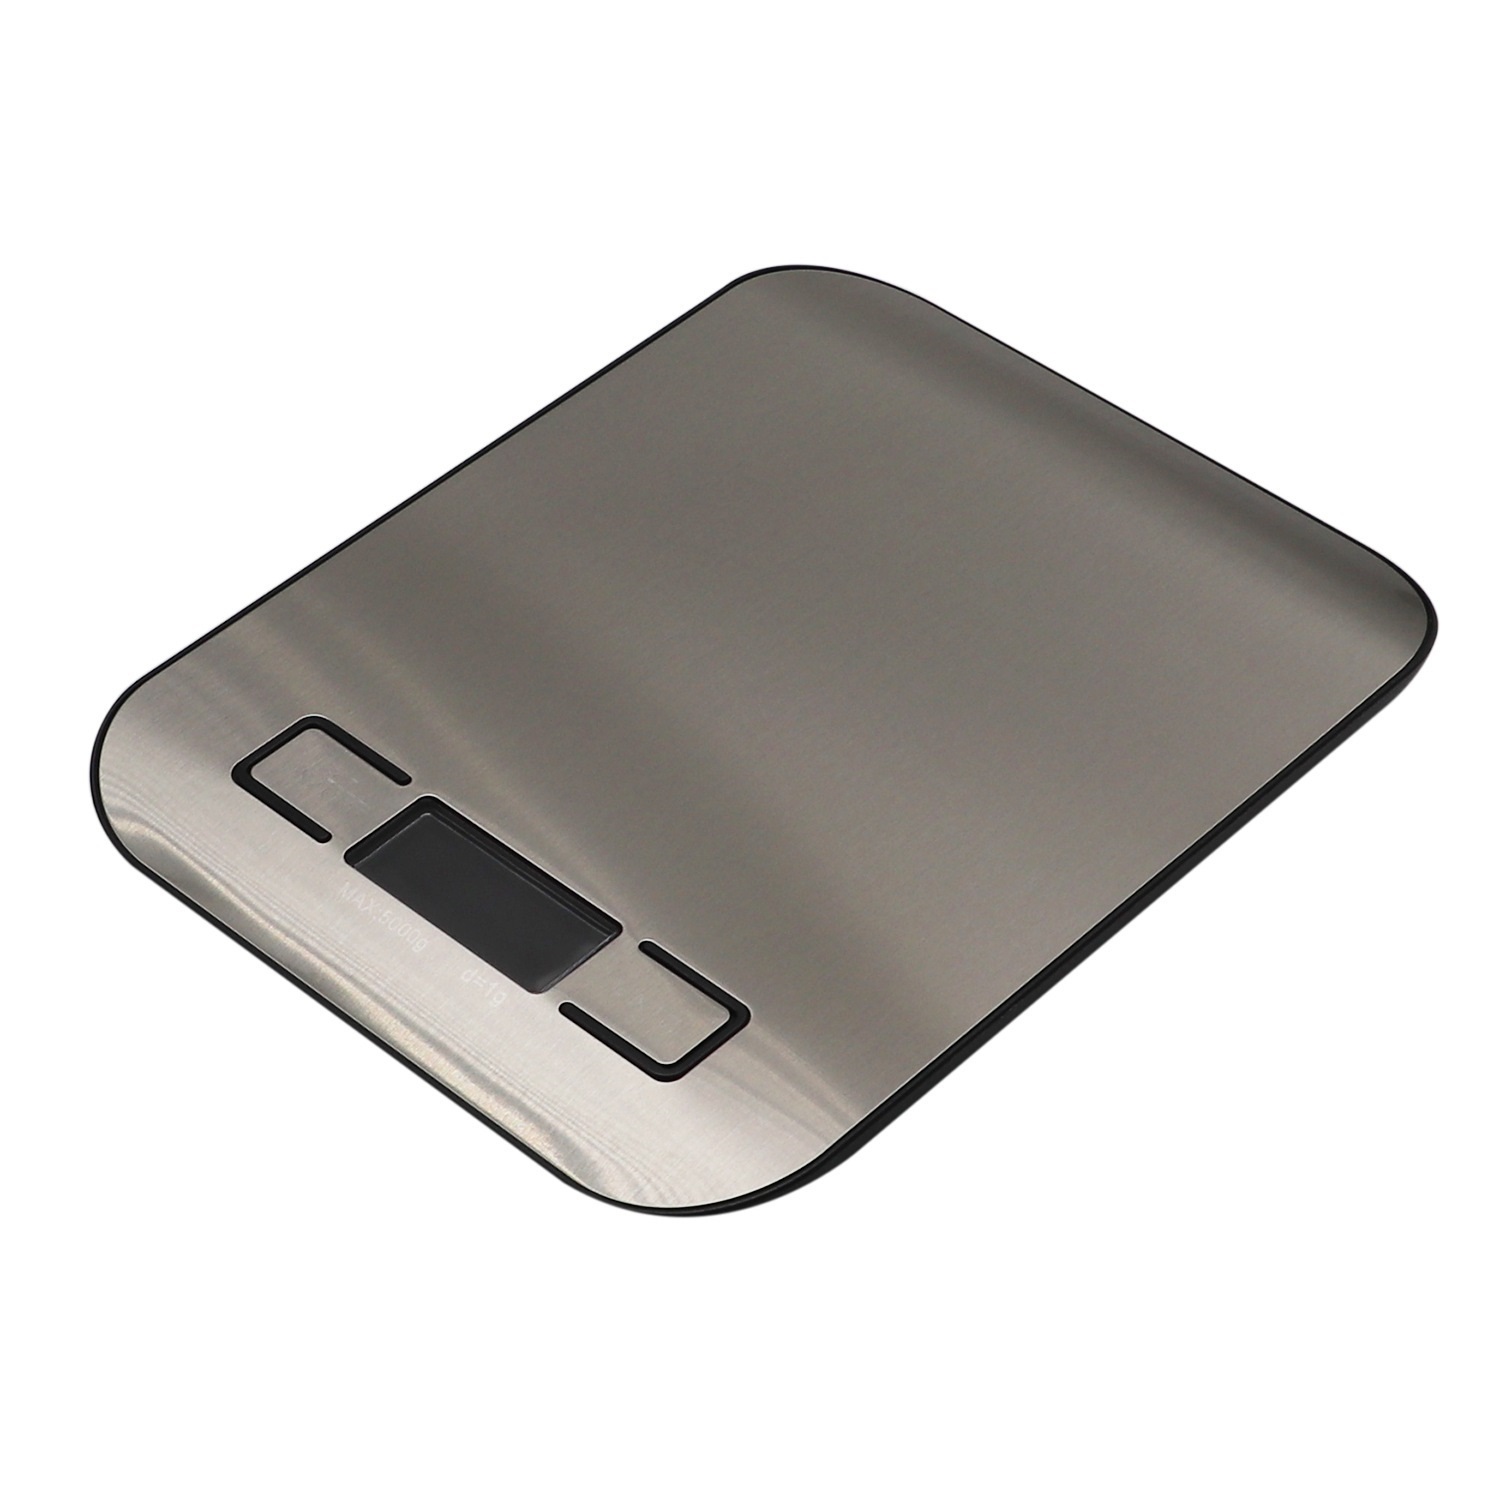 KS0020 Stainless Steel Digital Food Scale Digital Kitchen Scale Home Scale